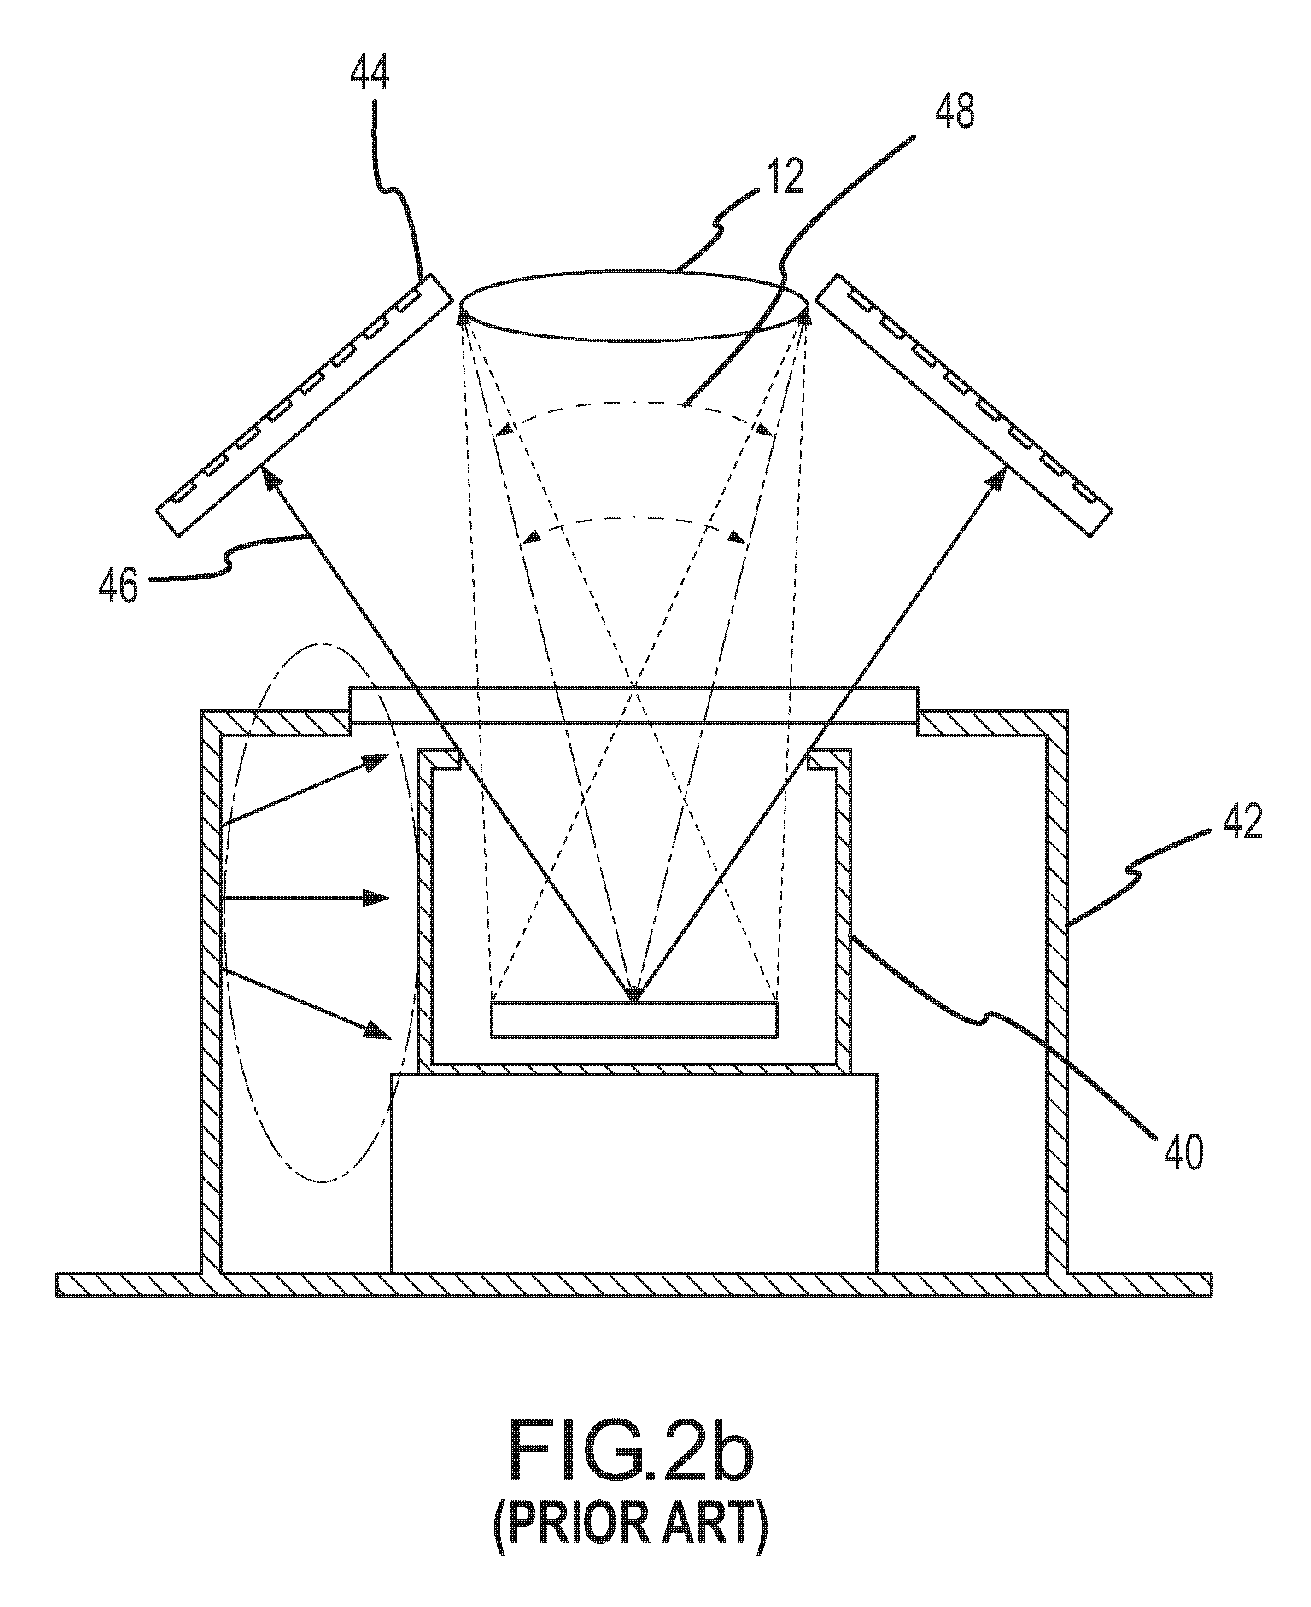 Negative luminescence cold shield (NLCS) with microlenses to magnify the effective area of sparsely populated negative luminescence regions and method of fabrication